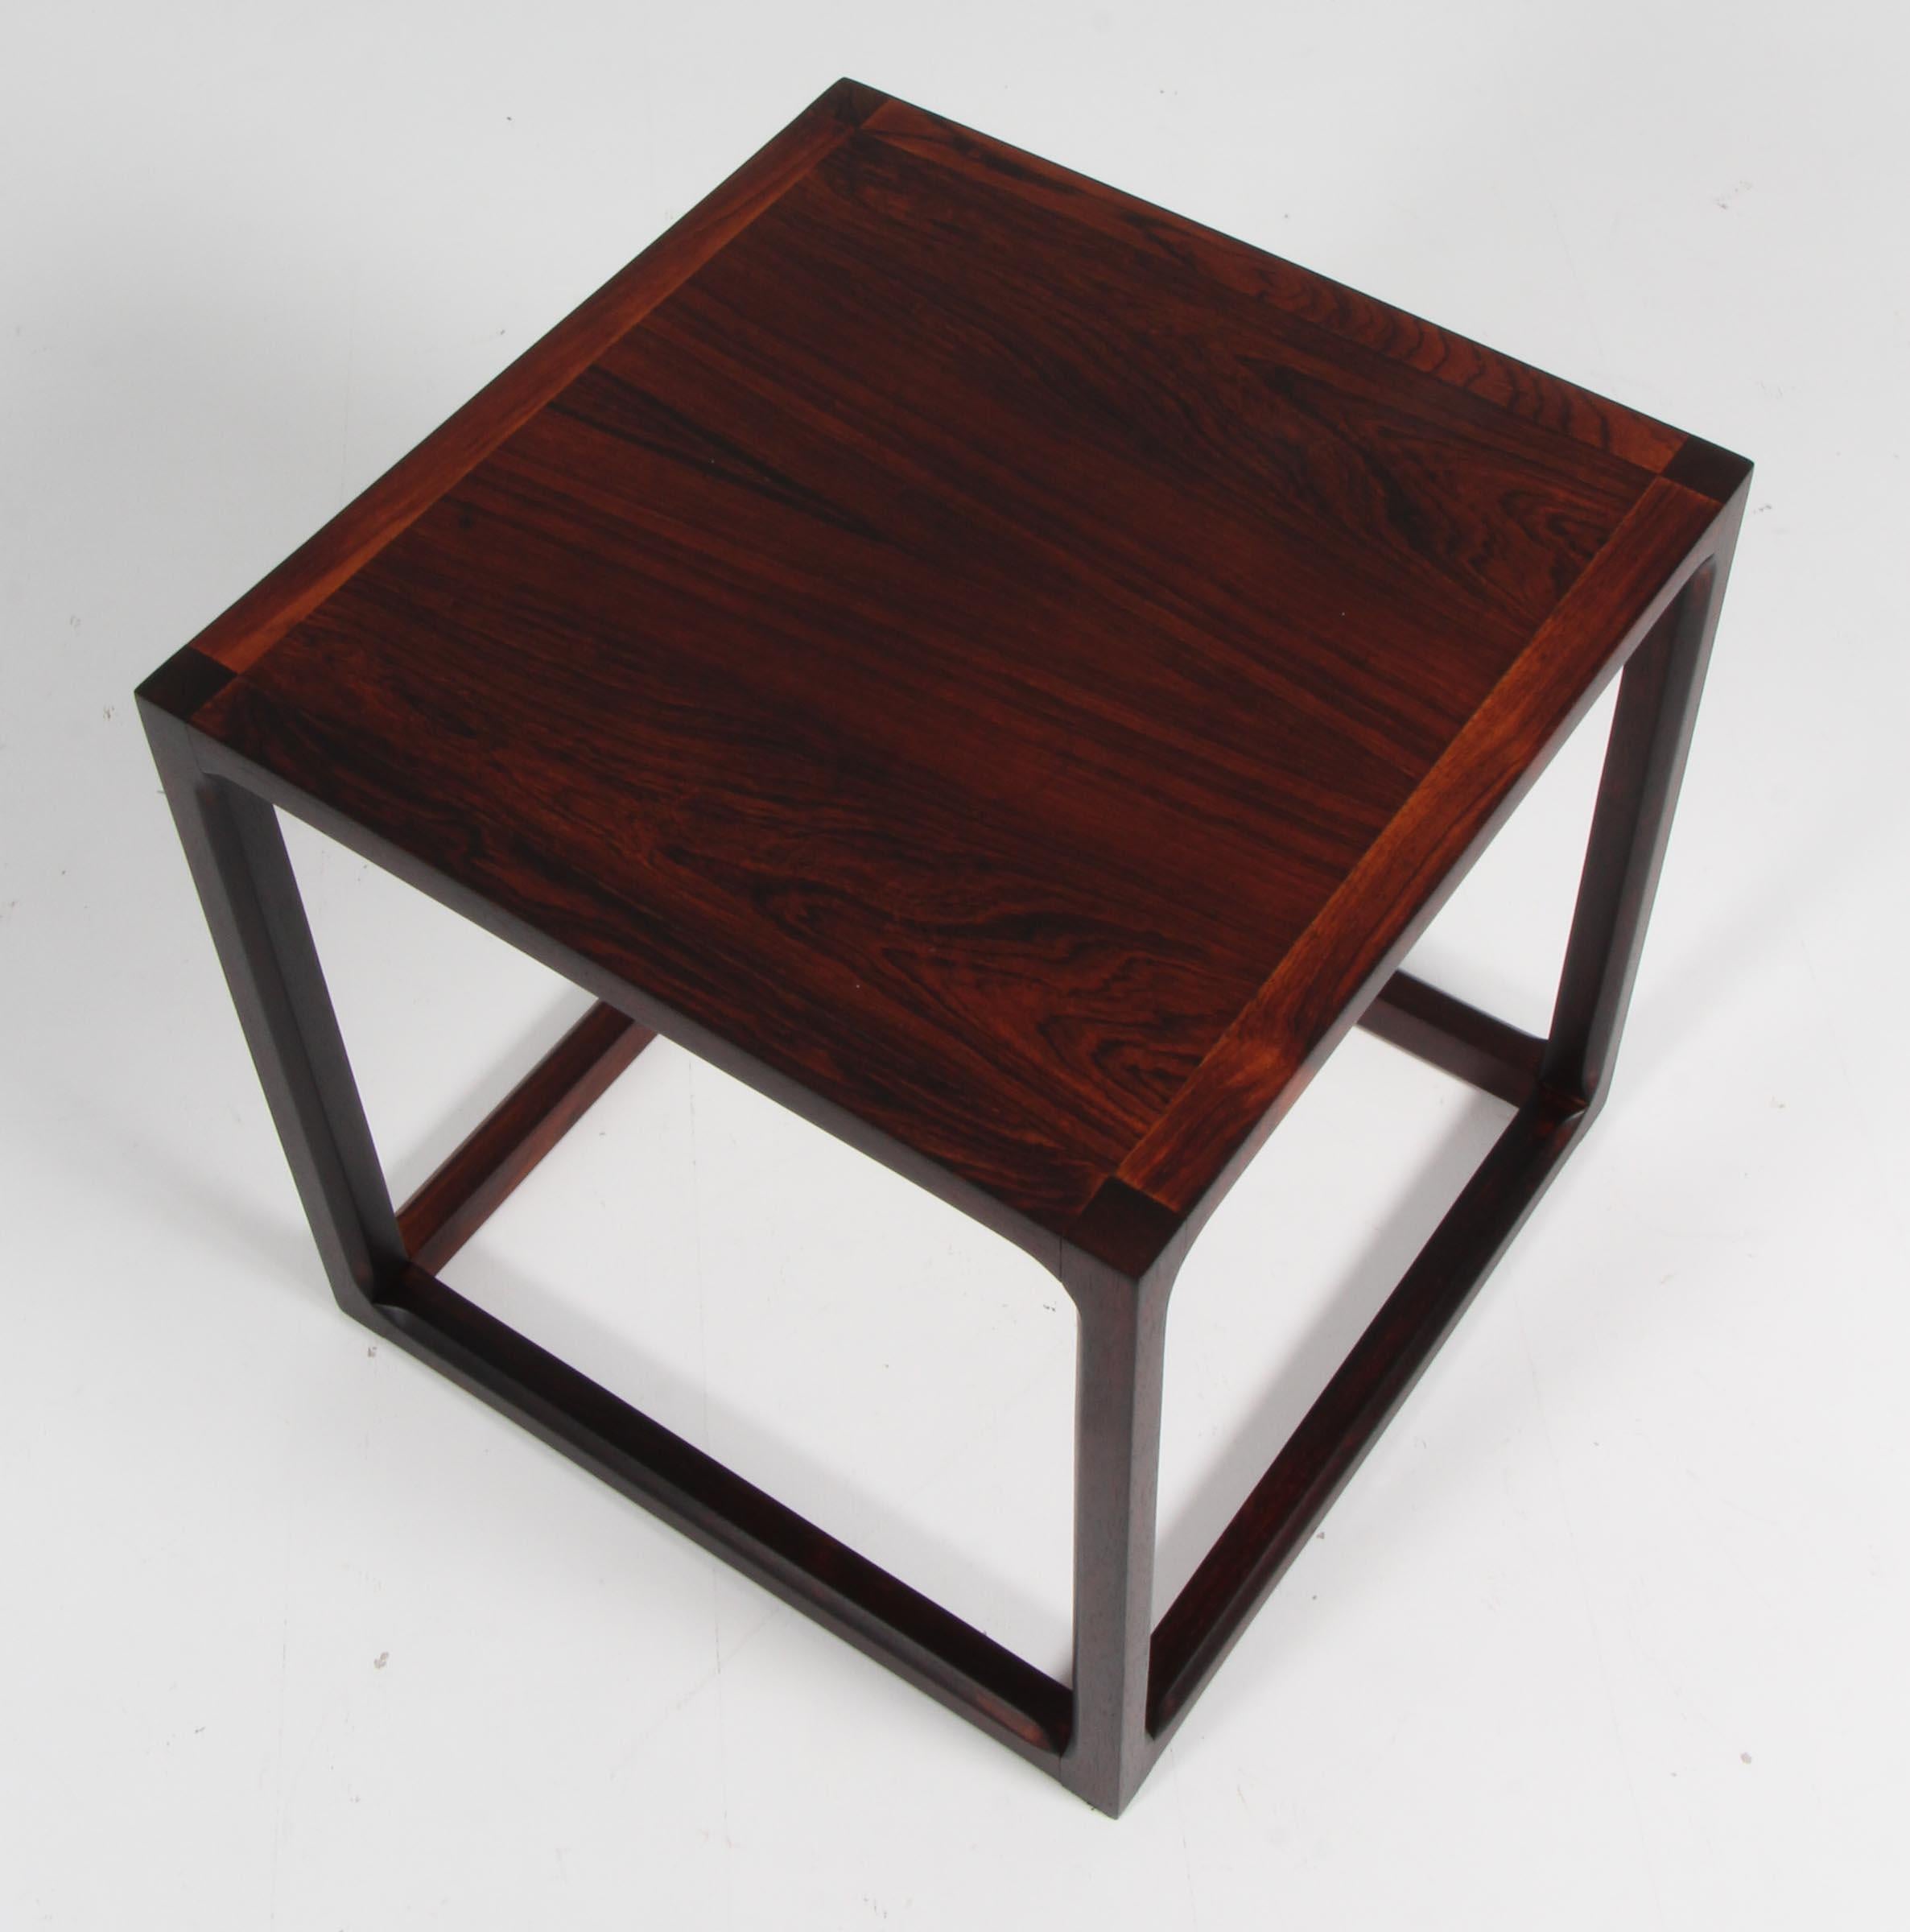 Kai Kristiansen cube side table.

Made of solid rosewood.

Made by Aksel Kjersgaard 1960s.